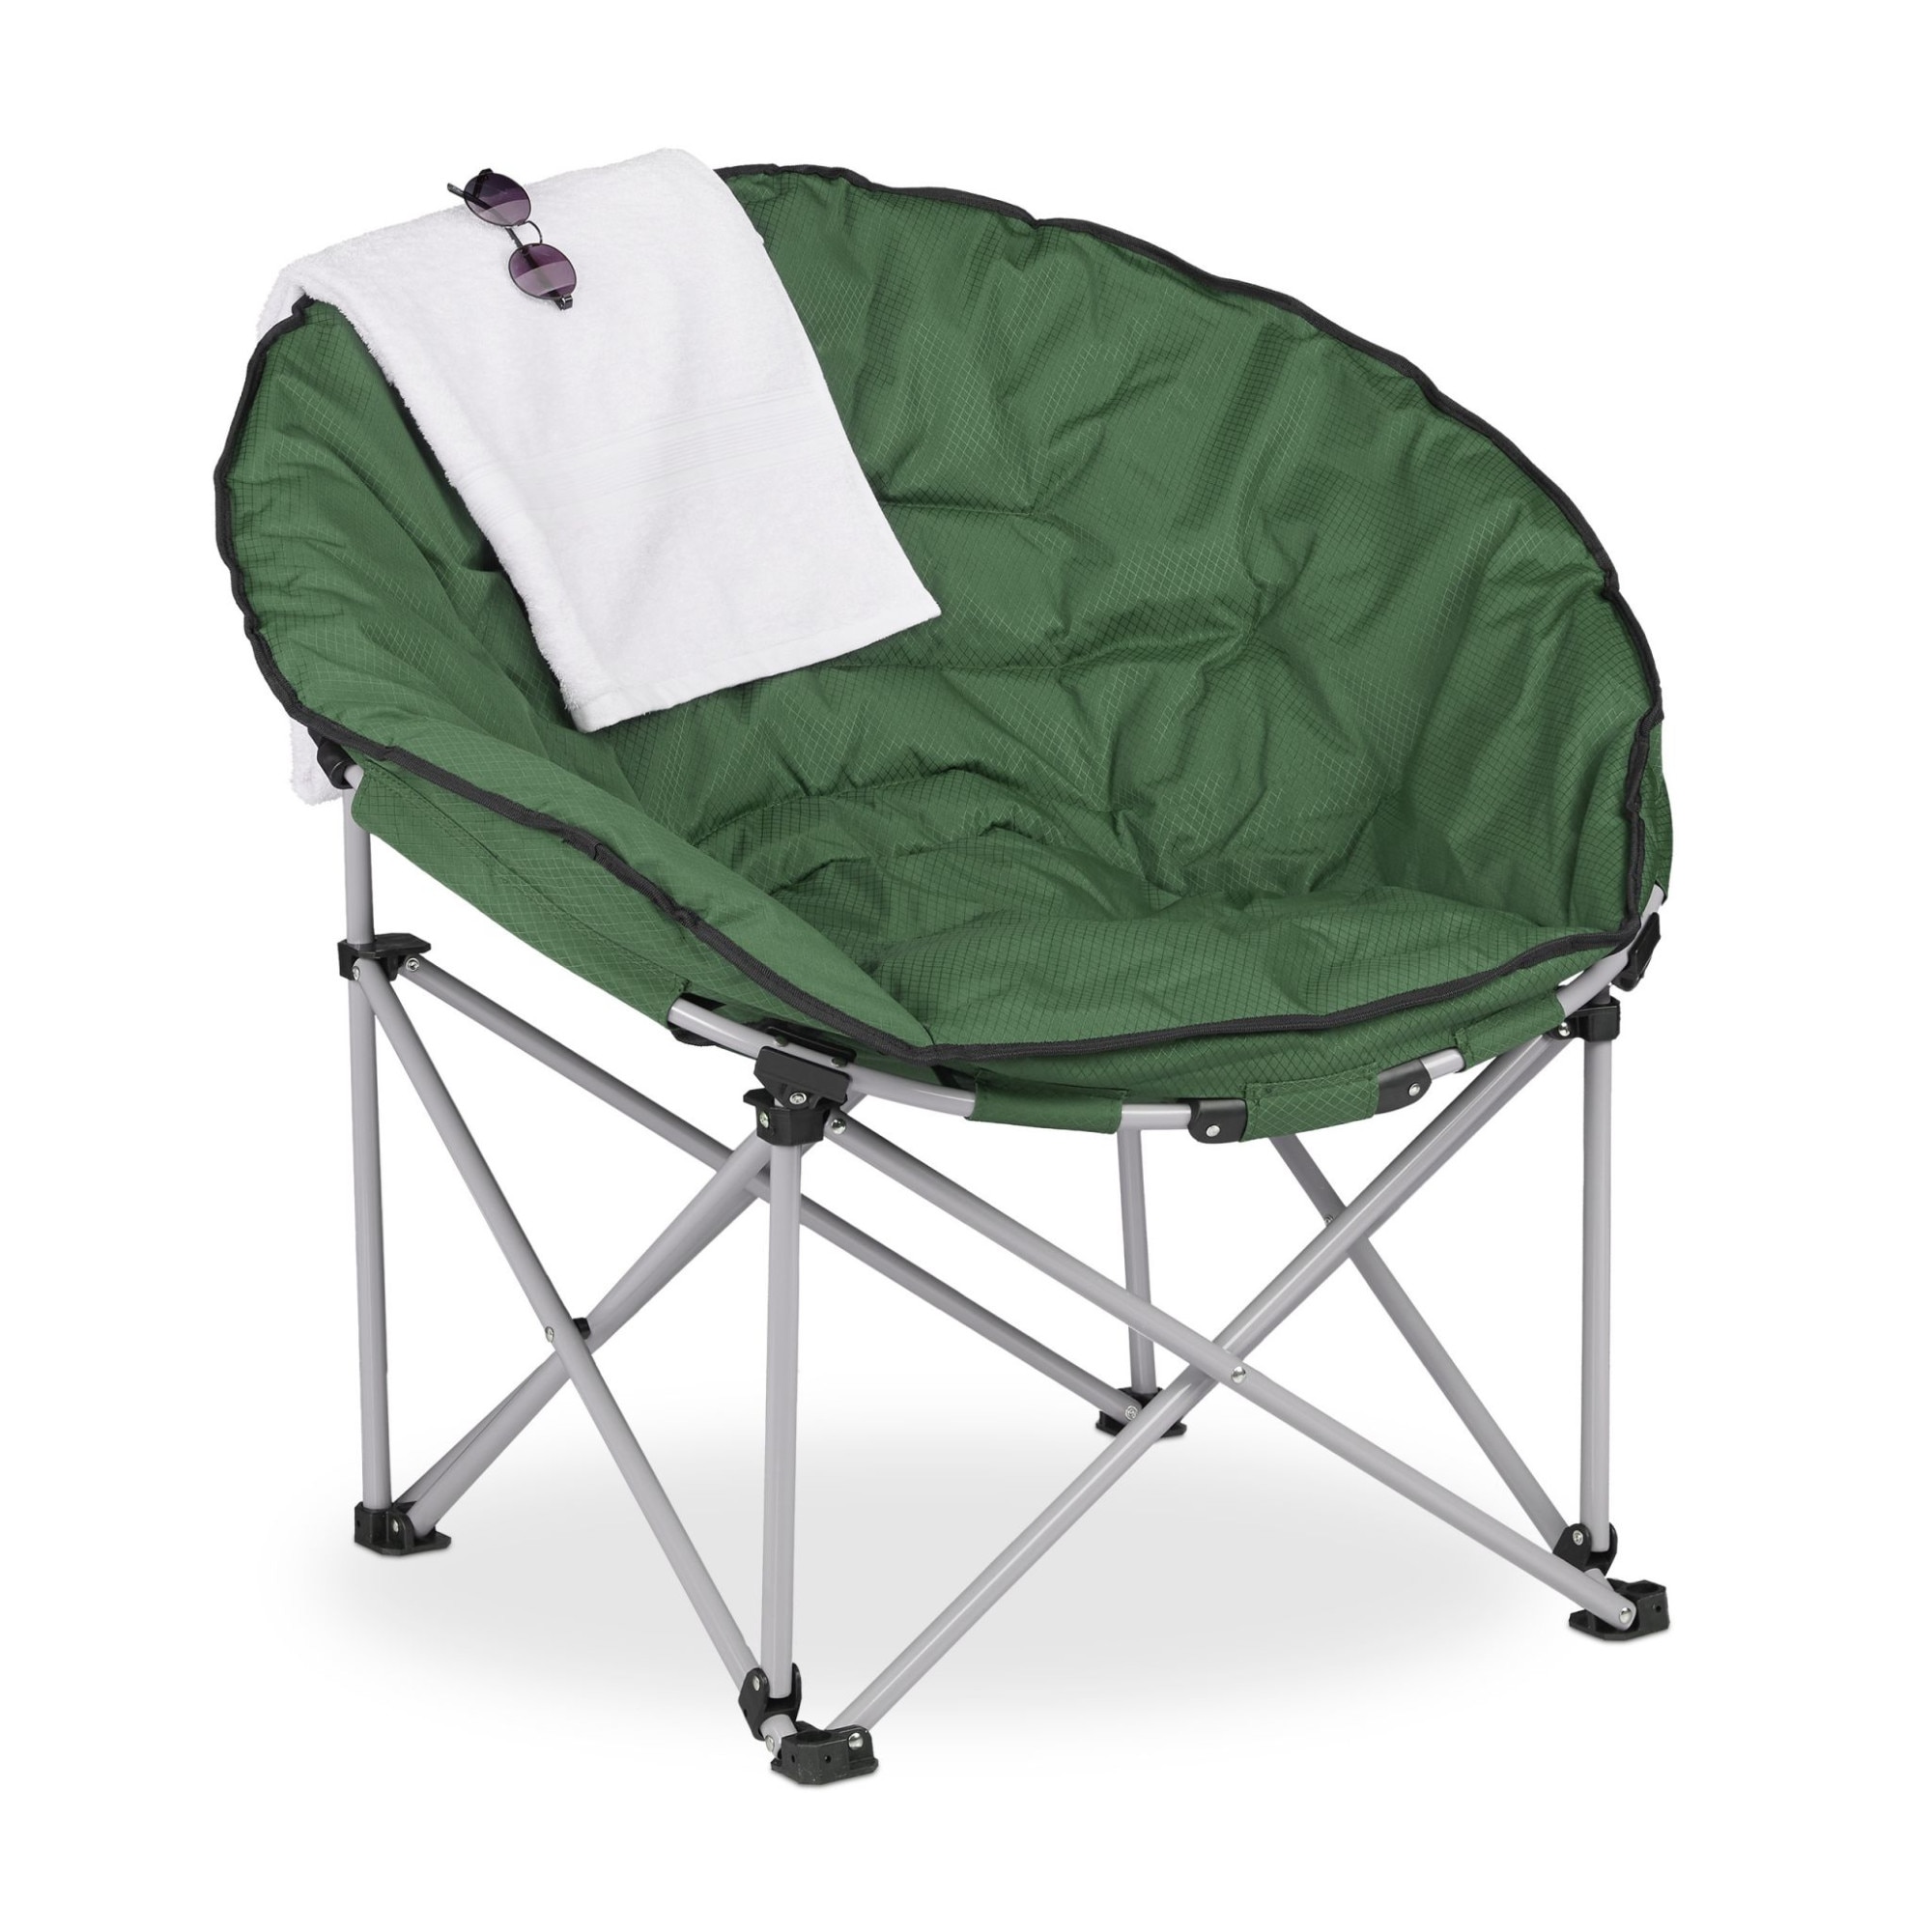 volleyball Refrain delivery Scaun pliabil Moon, XXL, 96x100x74 cm, verde inchis, capacitate 120kg,  Relaxdays - eMAG.ro